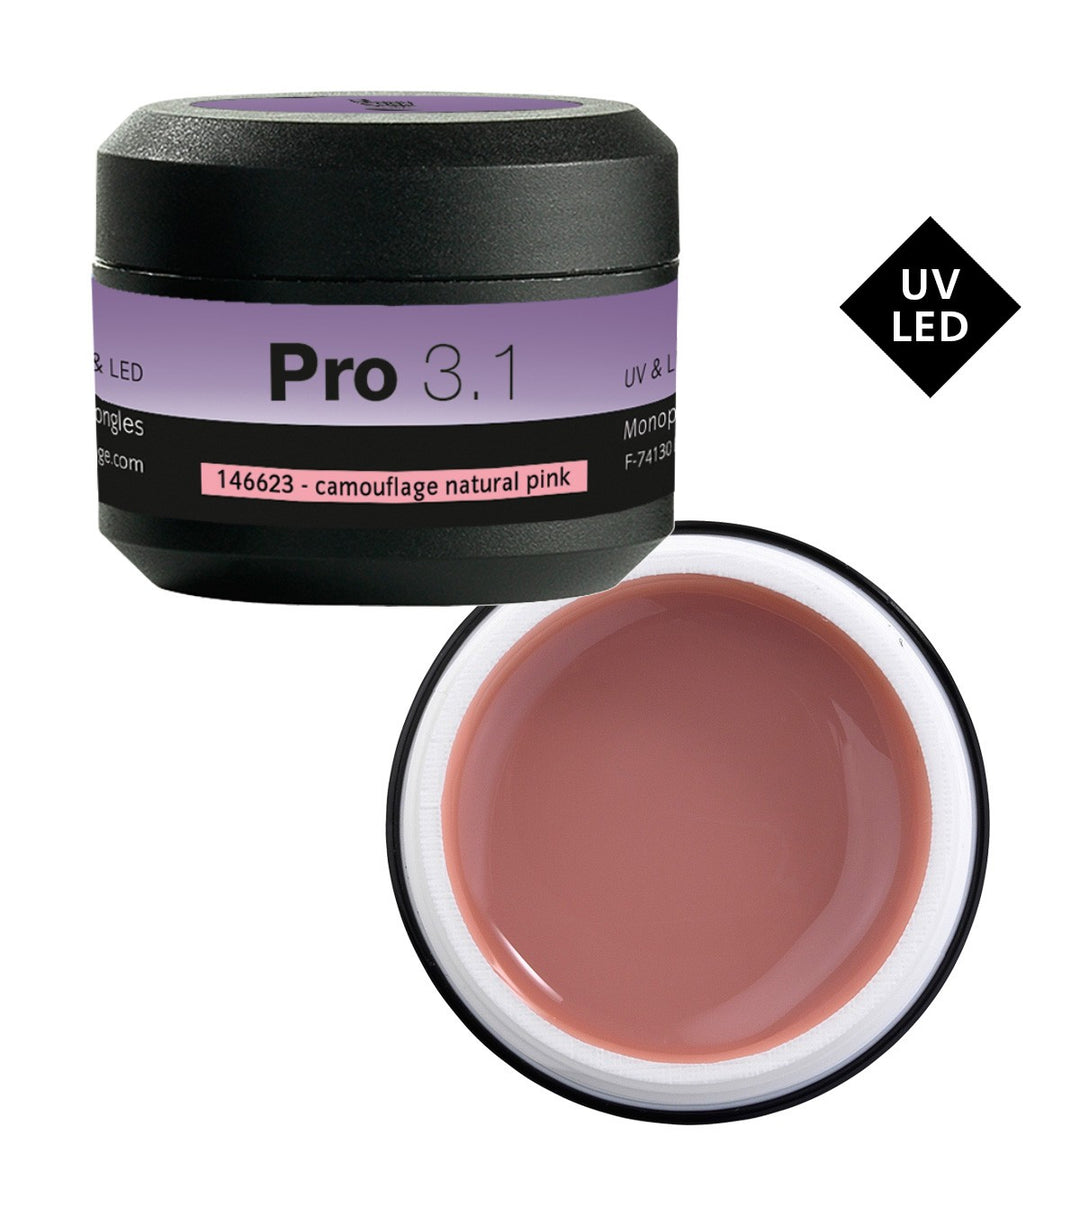 

"Peggy Sage Pro 3.1 One-Phase Gel for Natural Pink Camouflage Nails, 15 ml"